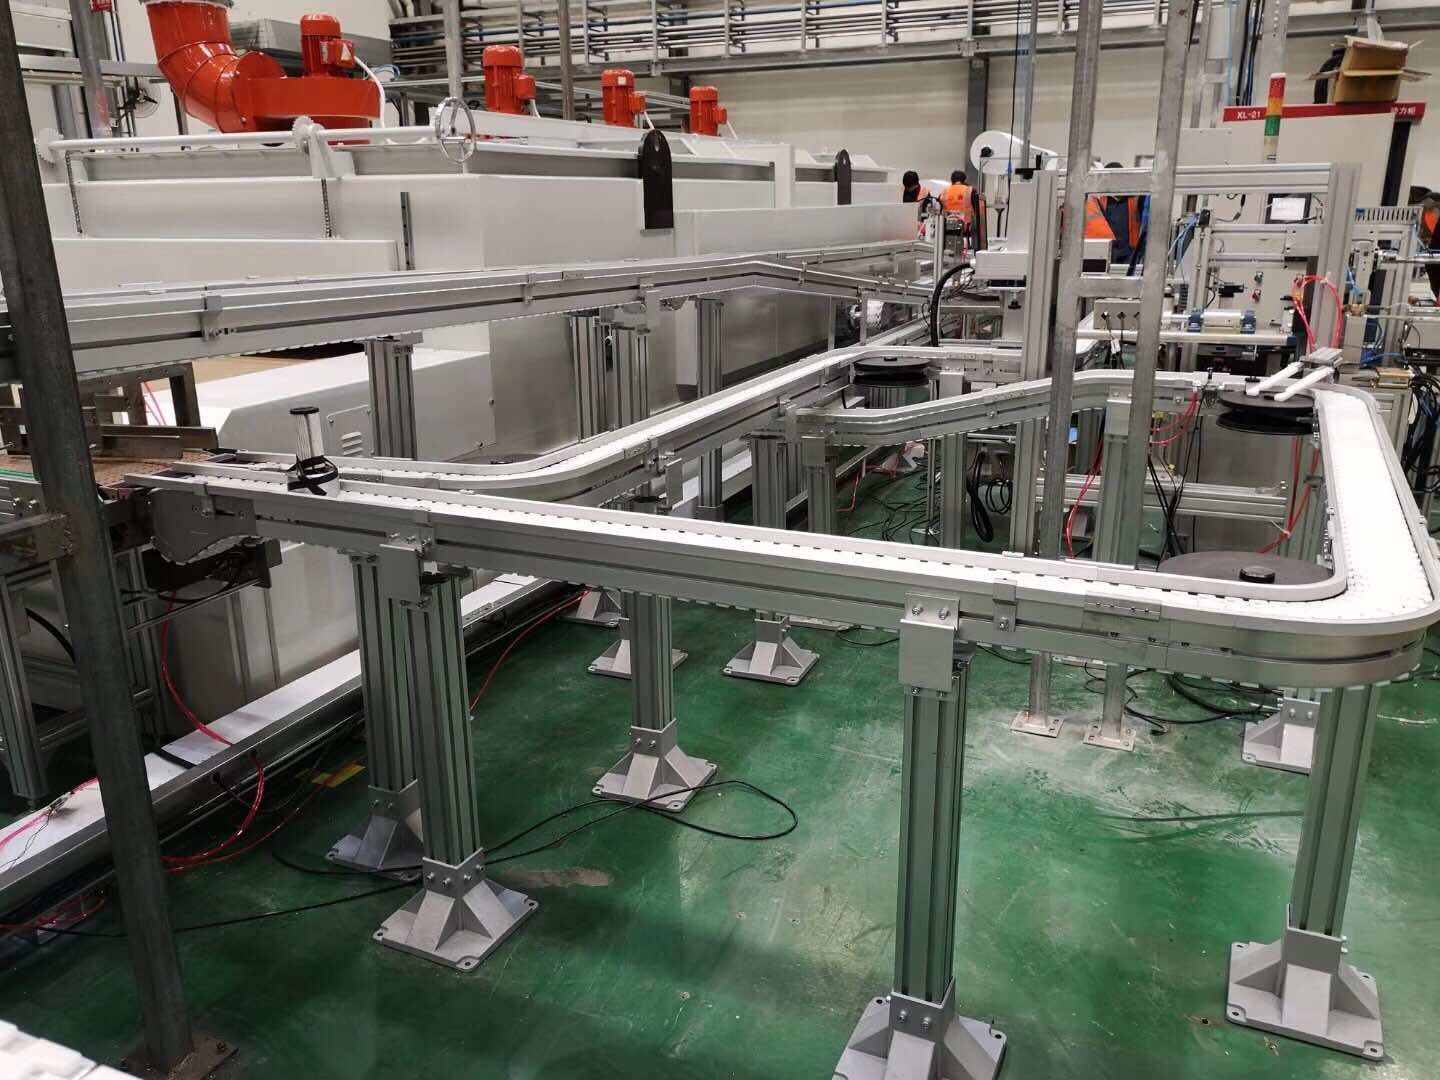 factory supply flexible chain conveyor design of conveyor system for food & beverages industry